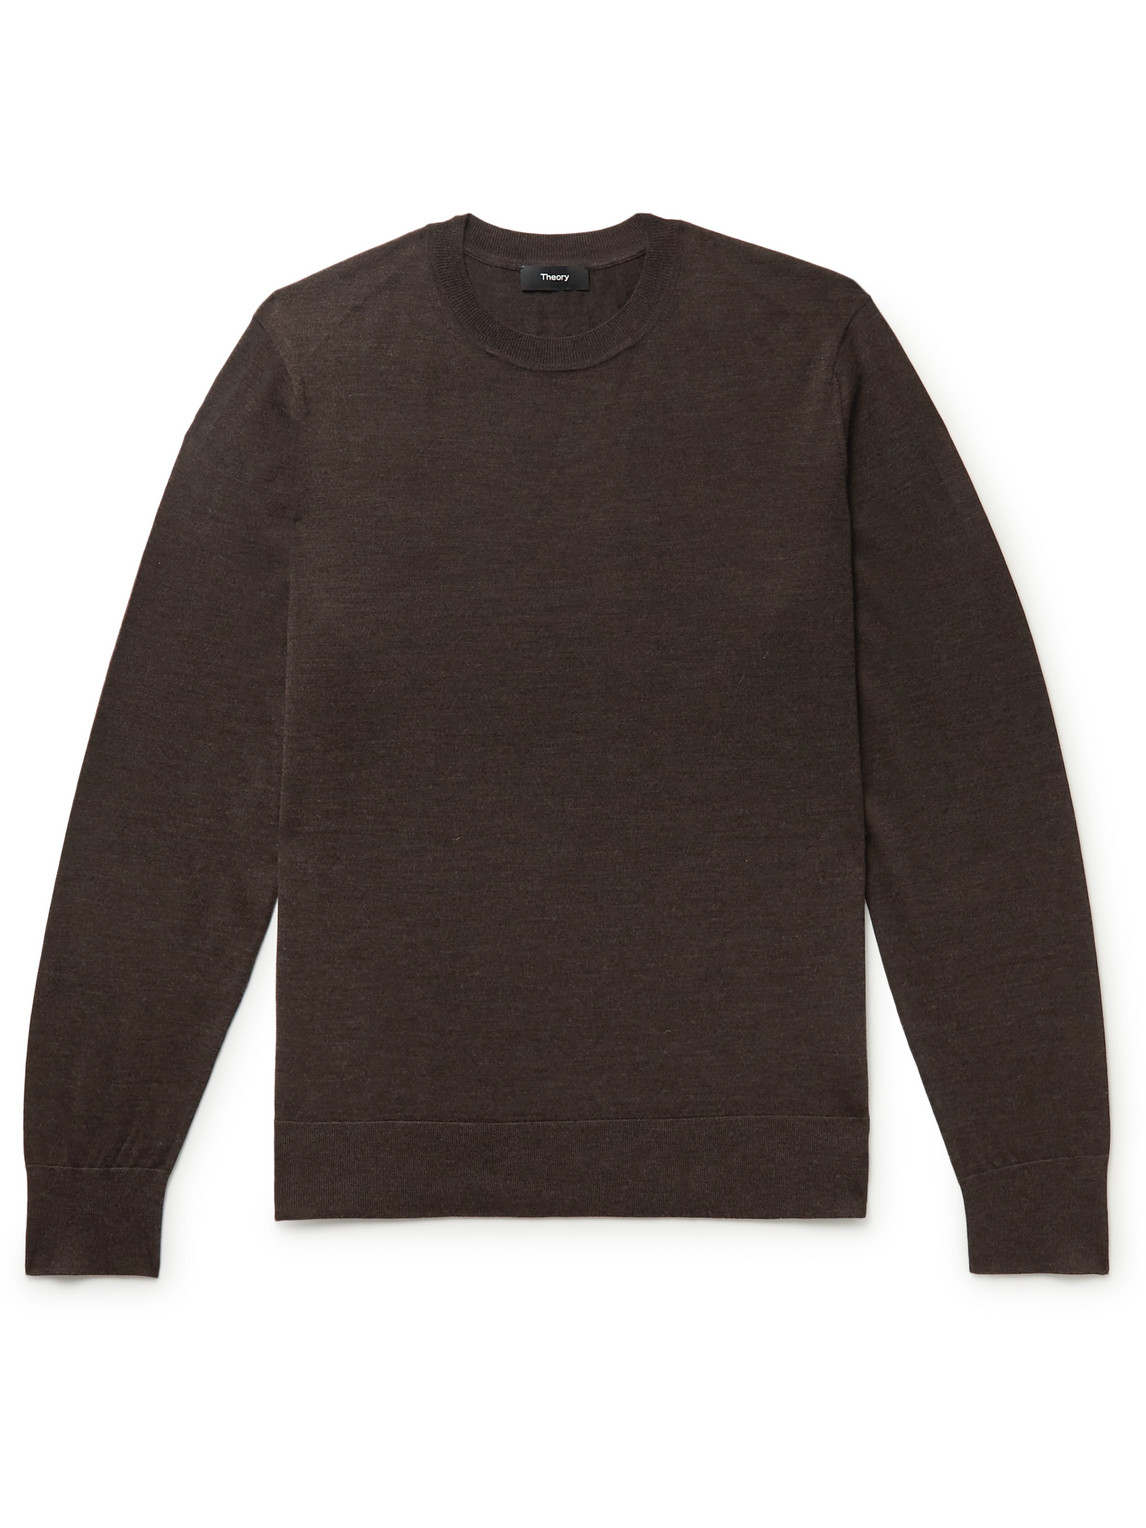 THEORY SLIM-FIT WOOL SWEATER